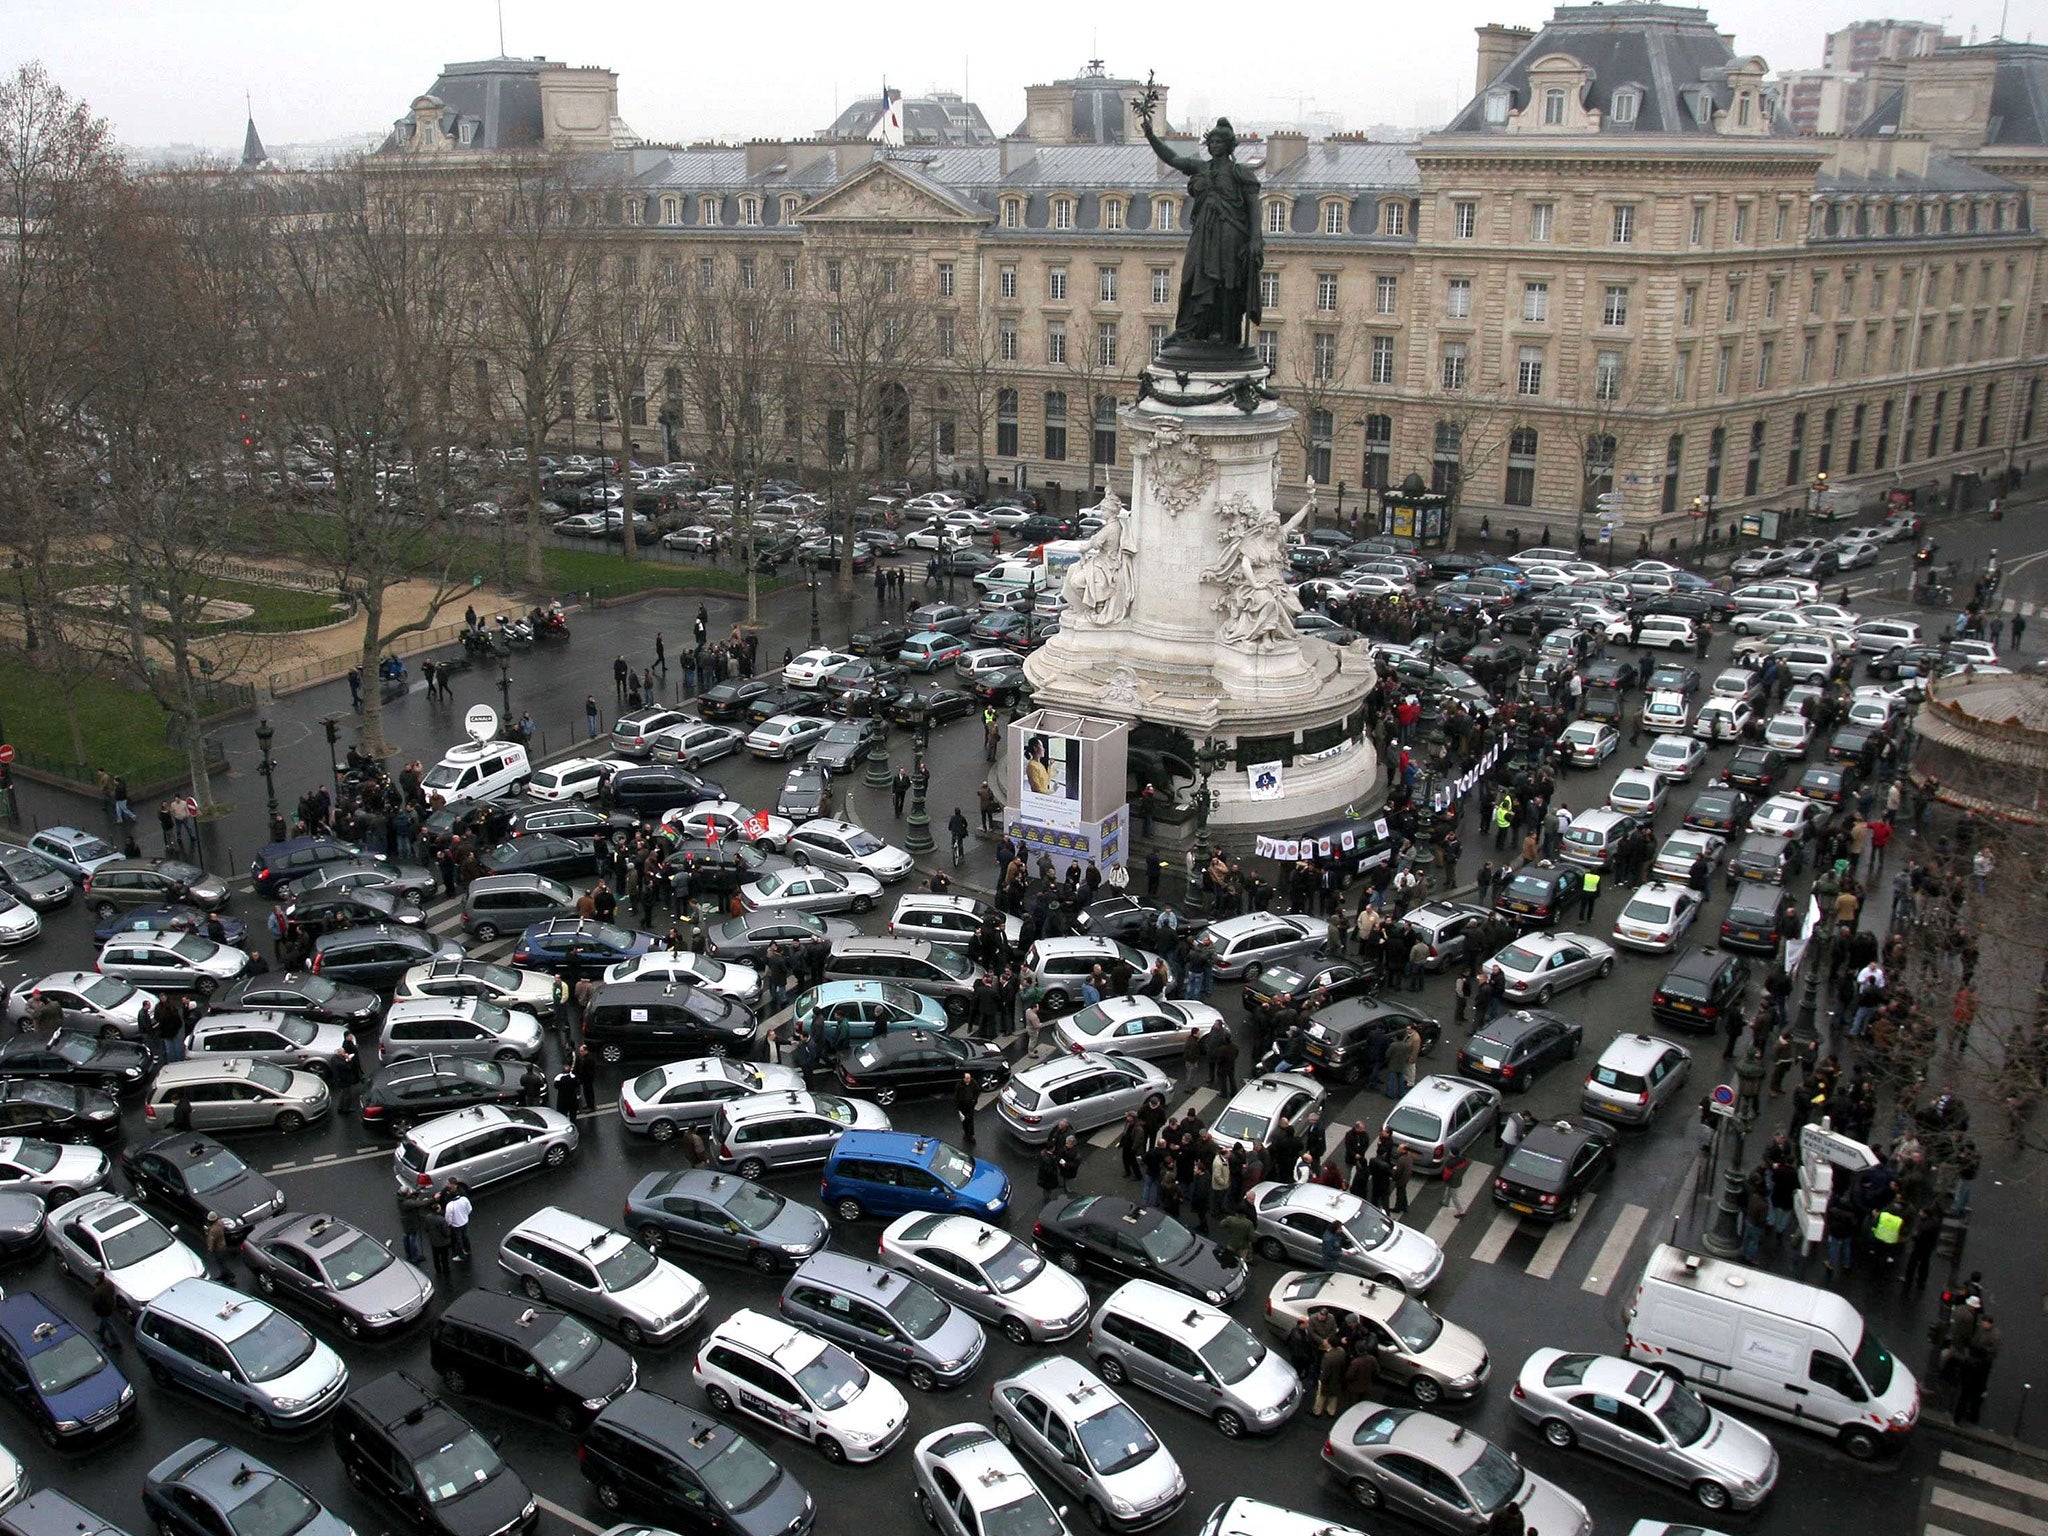 Traffic in Paris was even worse than usual during this taxi drivers’ protest at the Place de la République